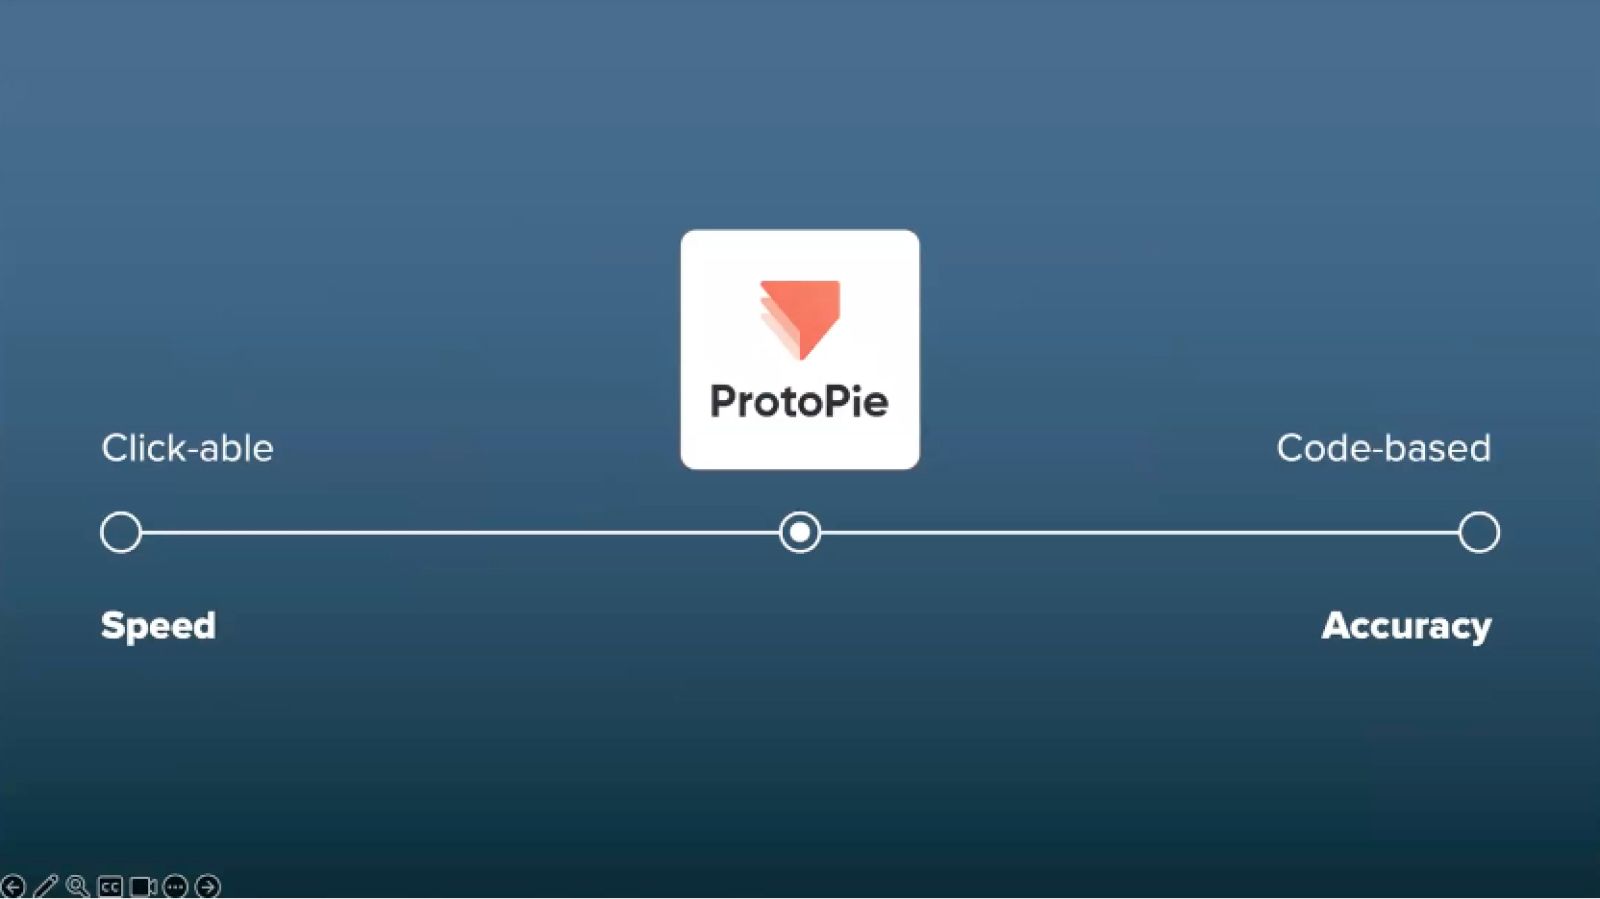 Having ProtoPie in the middle allows Sunrise Labs to balance the complexity they need to achieve accuracy while still being able to evolve and change the design quickly–limiting perfectionism.